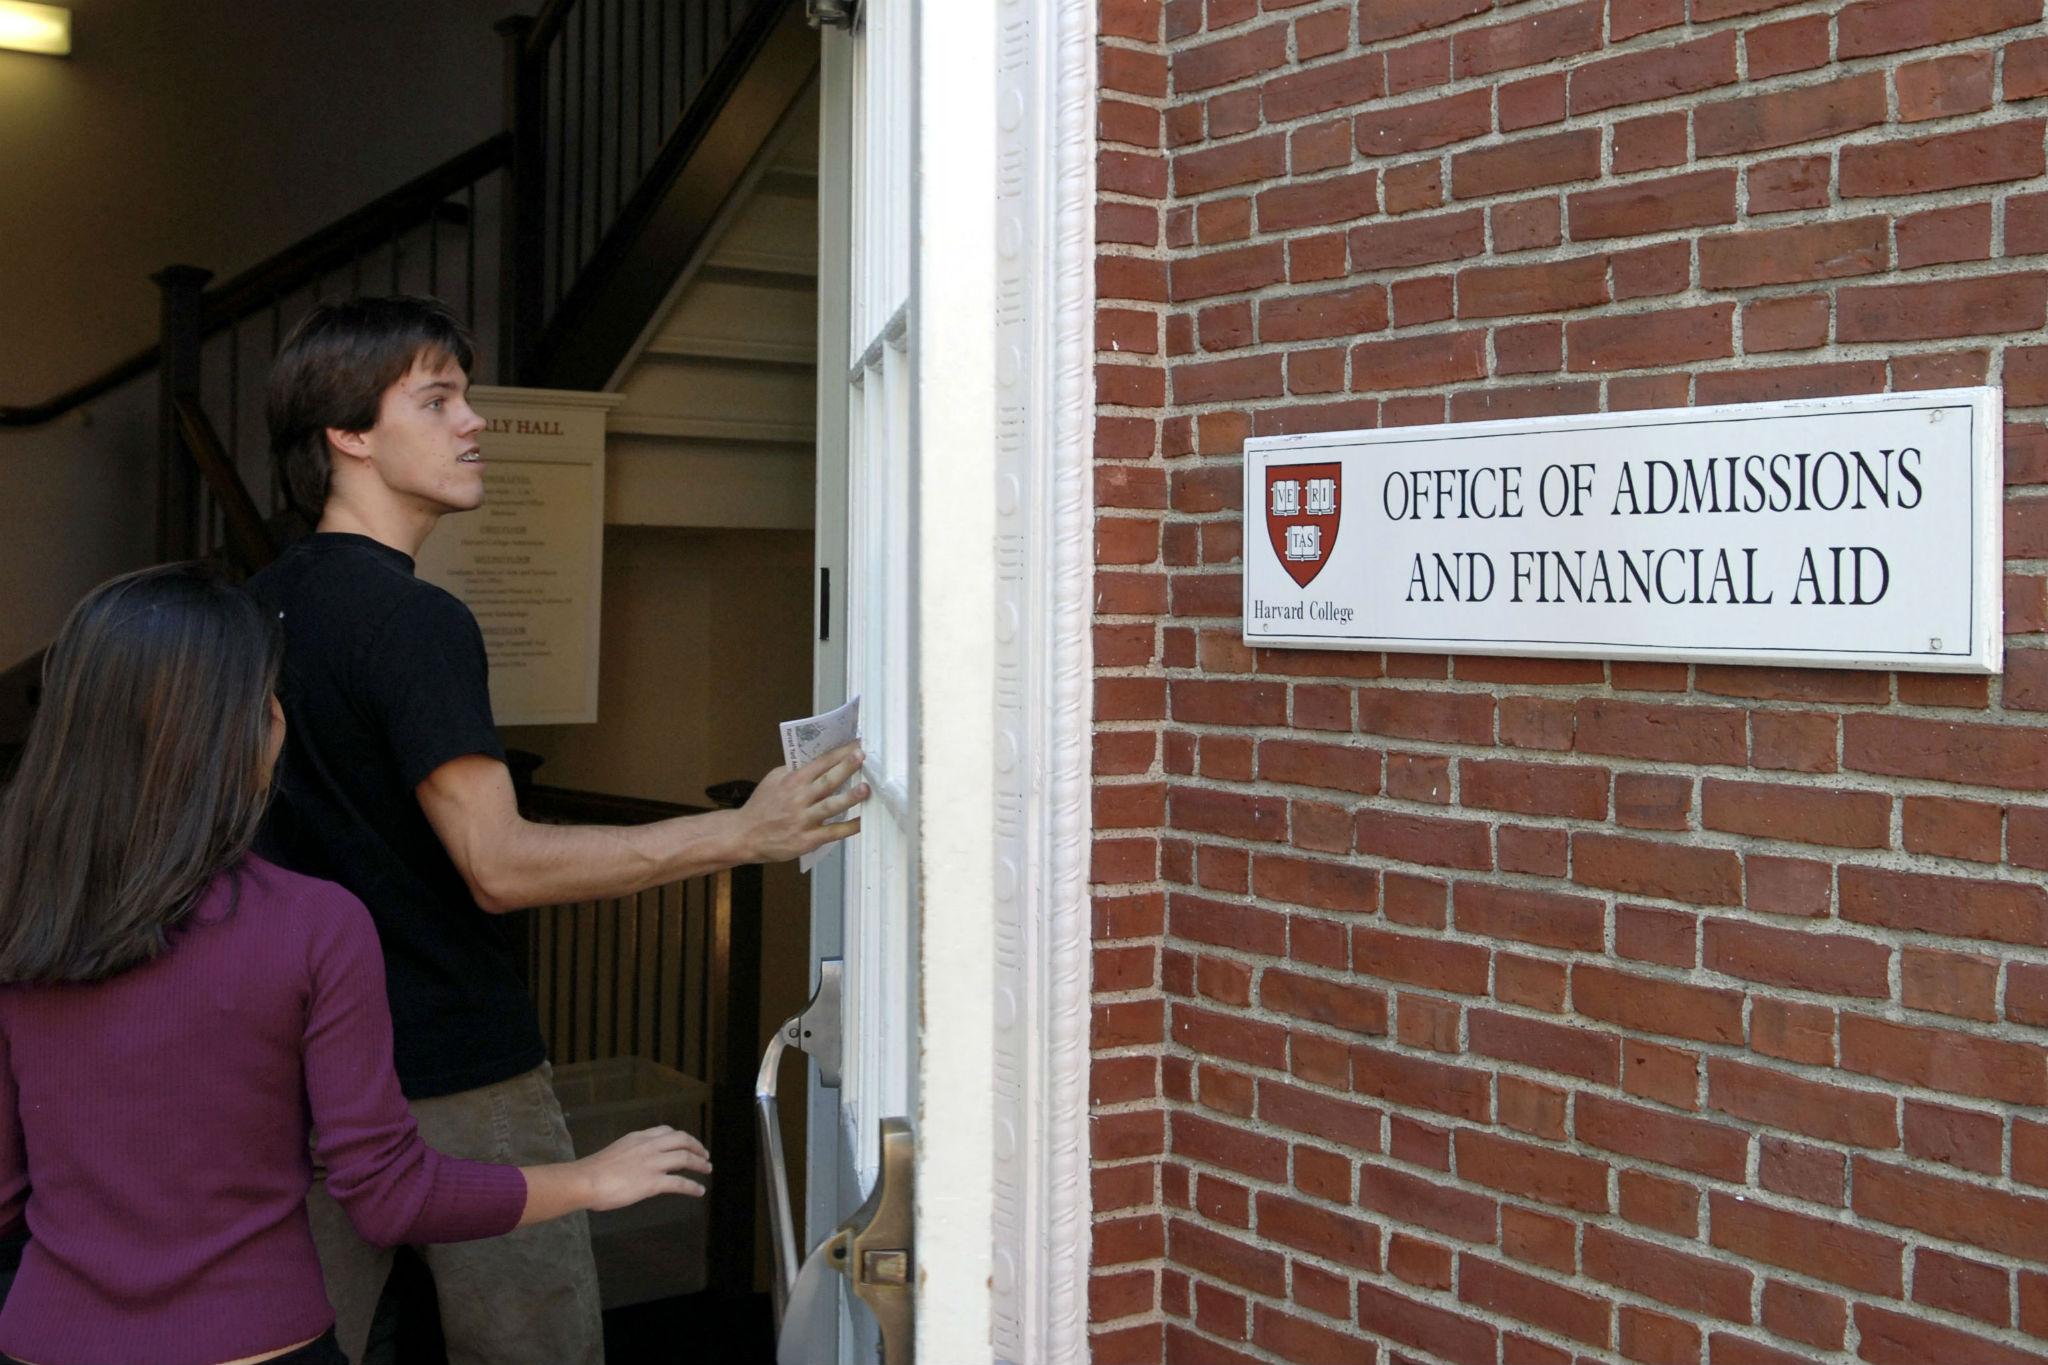 Students enter the Admissions Building on the campus of Harvard University in Cambridge, Massachusetts (Photo by Glen Cooper/Getty Images)